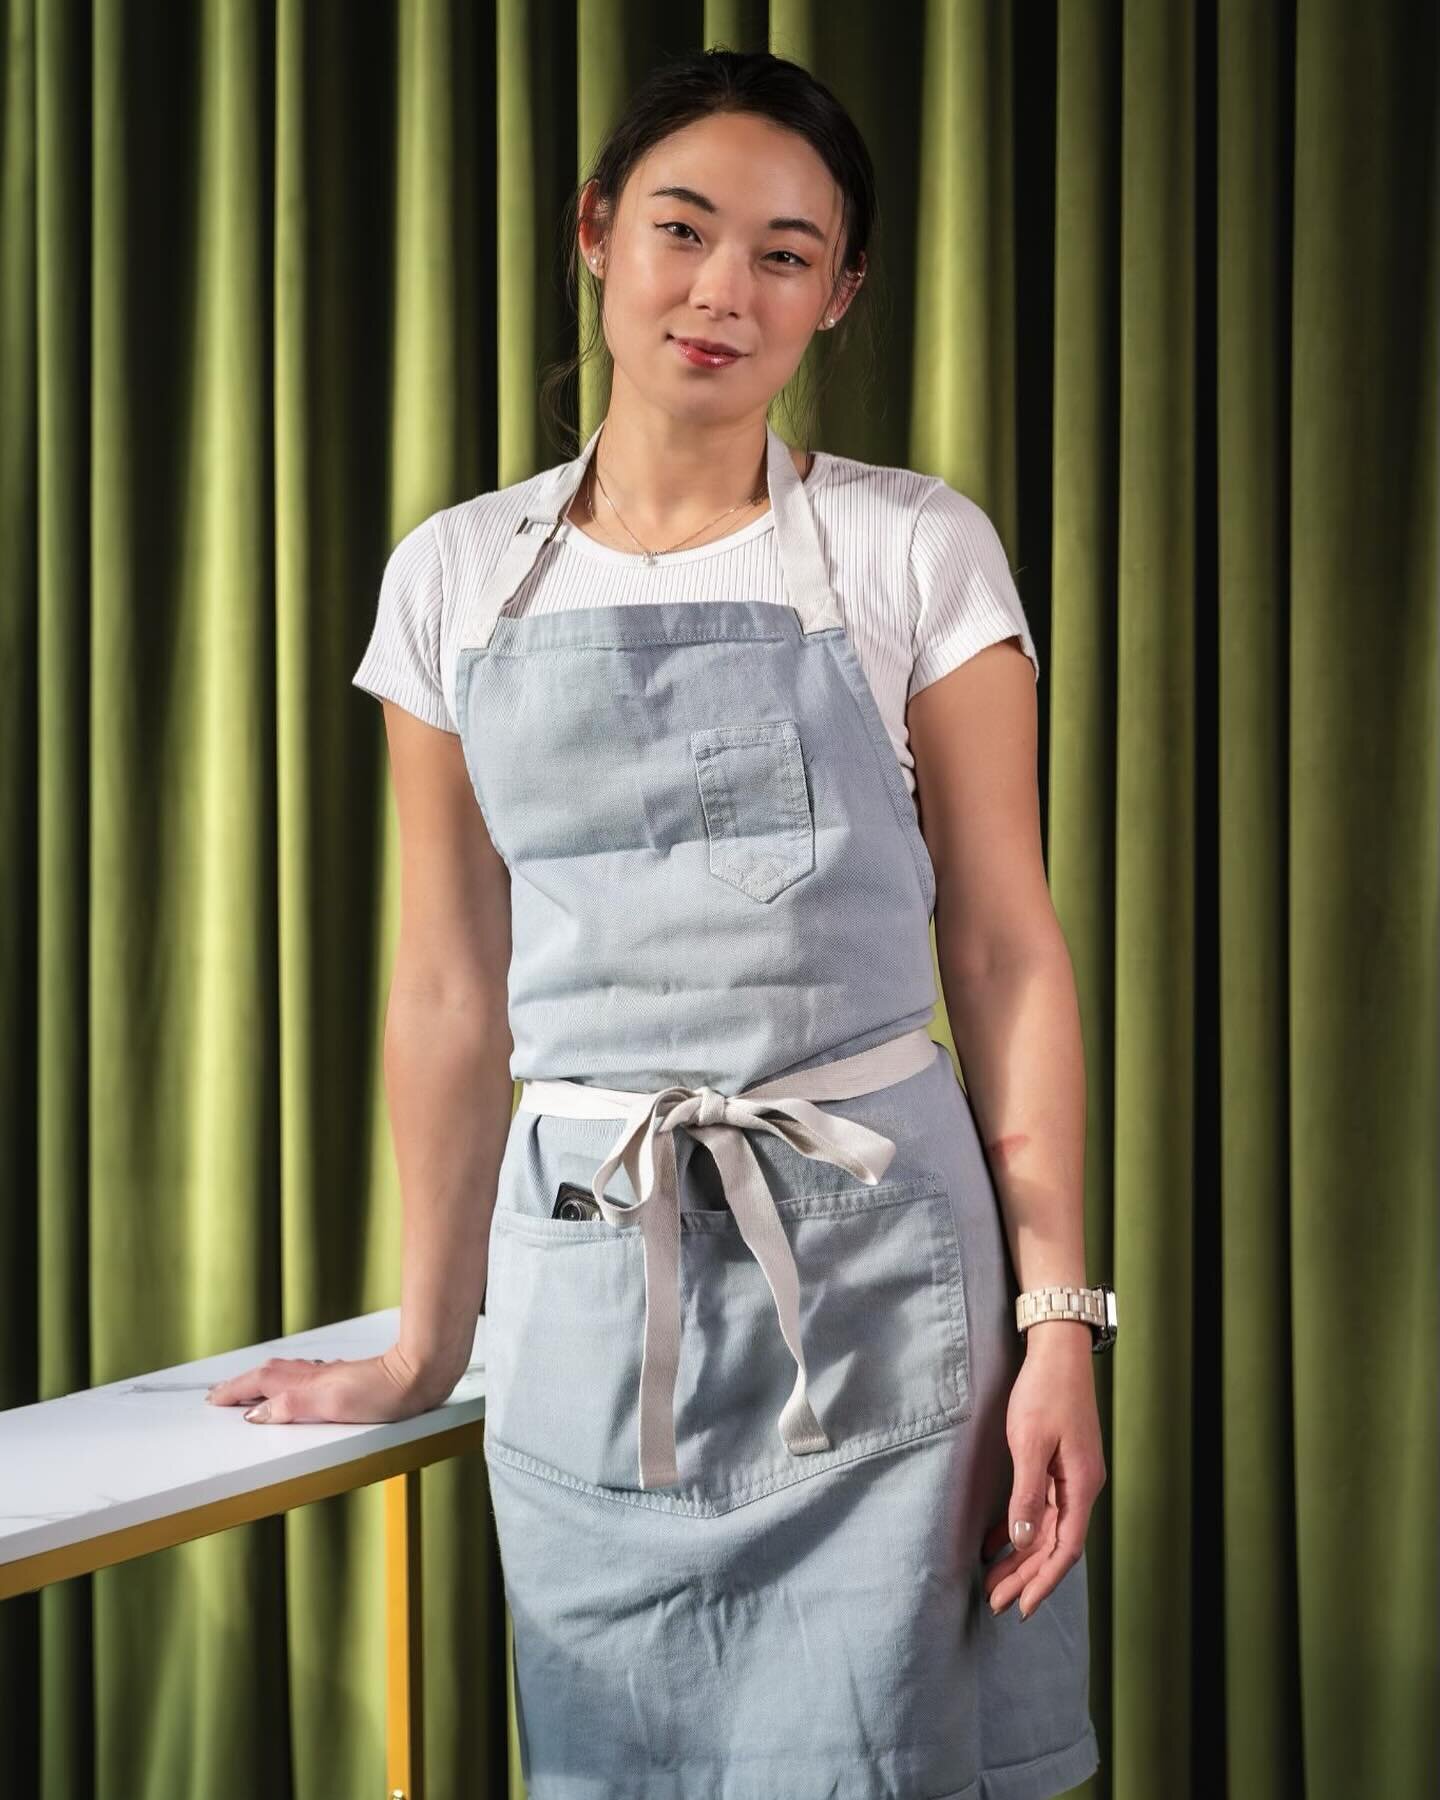 Join us for a star-studded female pastry chef event on Sunday (3/24) to celebrate Women&rsquo;s History Month!&nbsp;Pastry Chef @susanbae of @moonrabbitdc welcomes some of the best &amp; brightest in the Northeast including @pastryschiff , @chabelaco